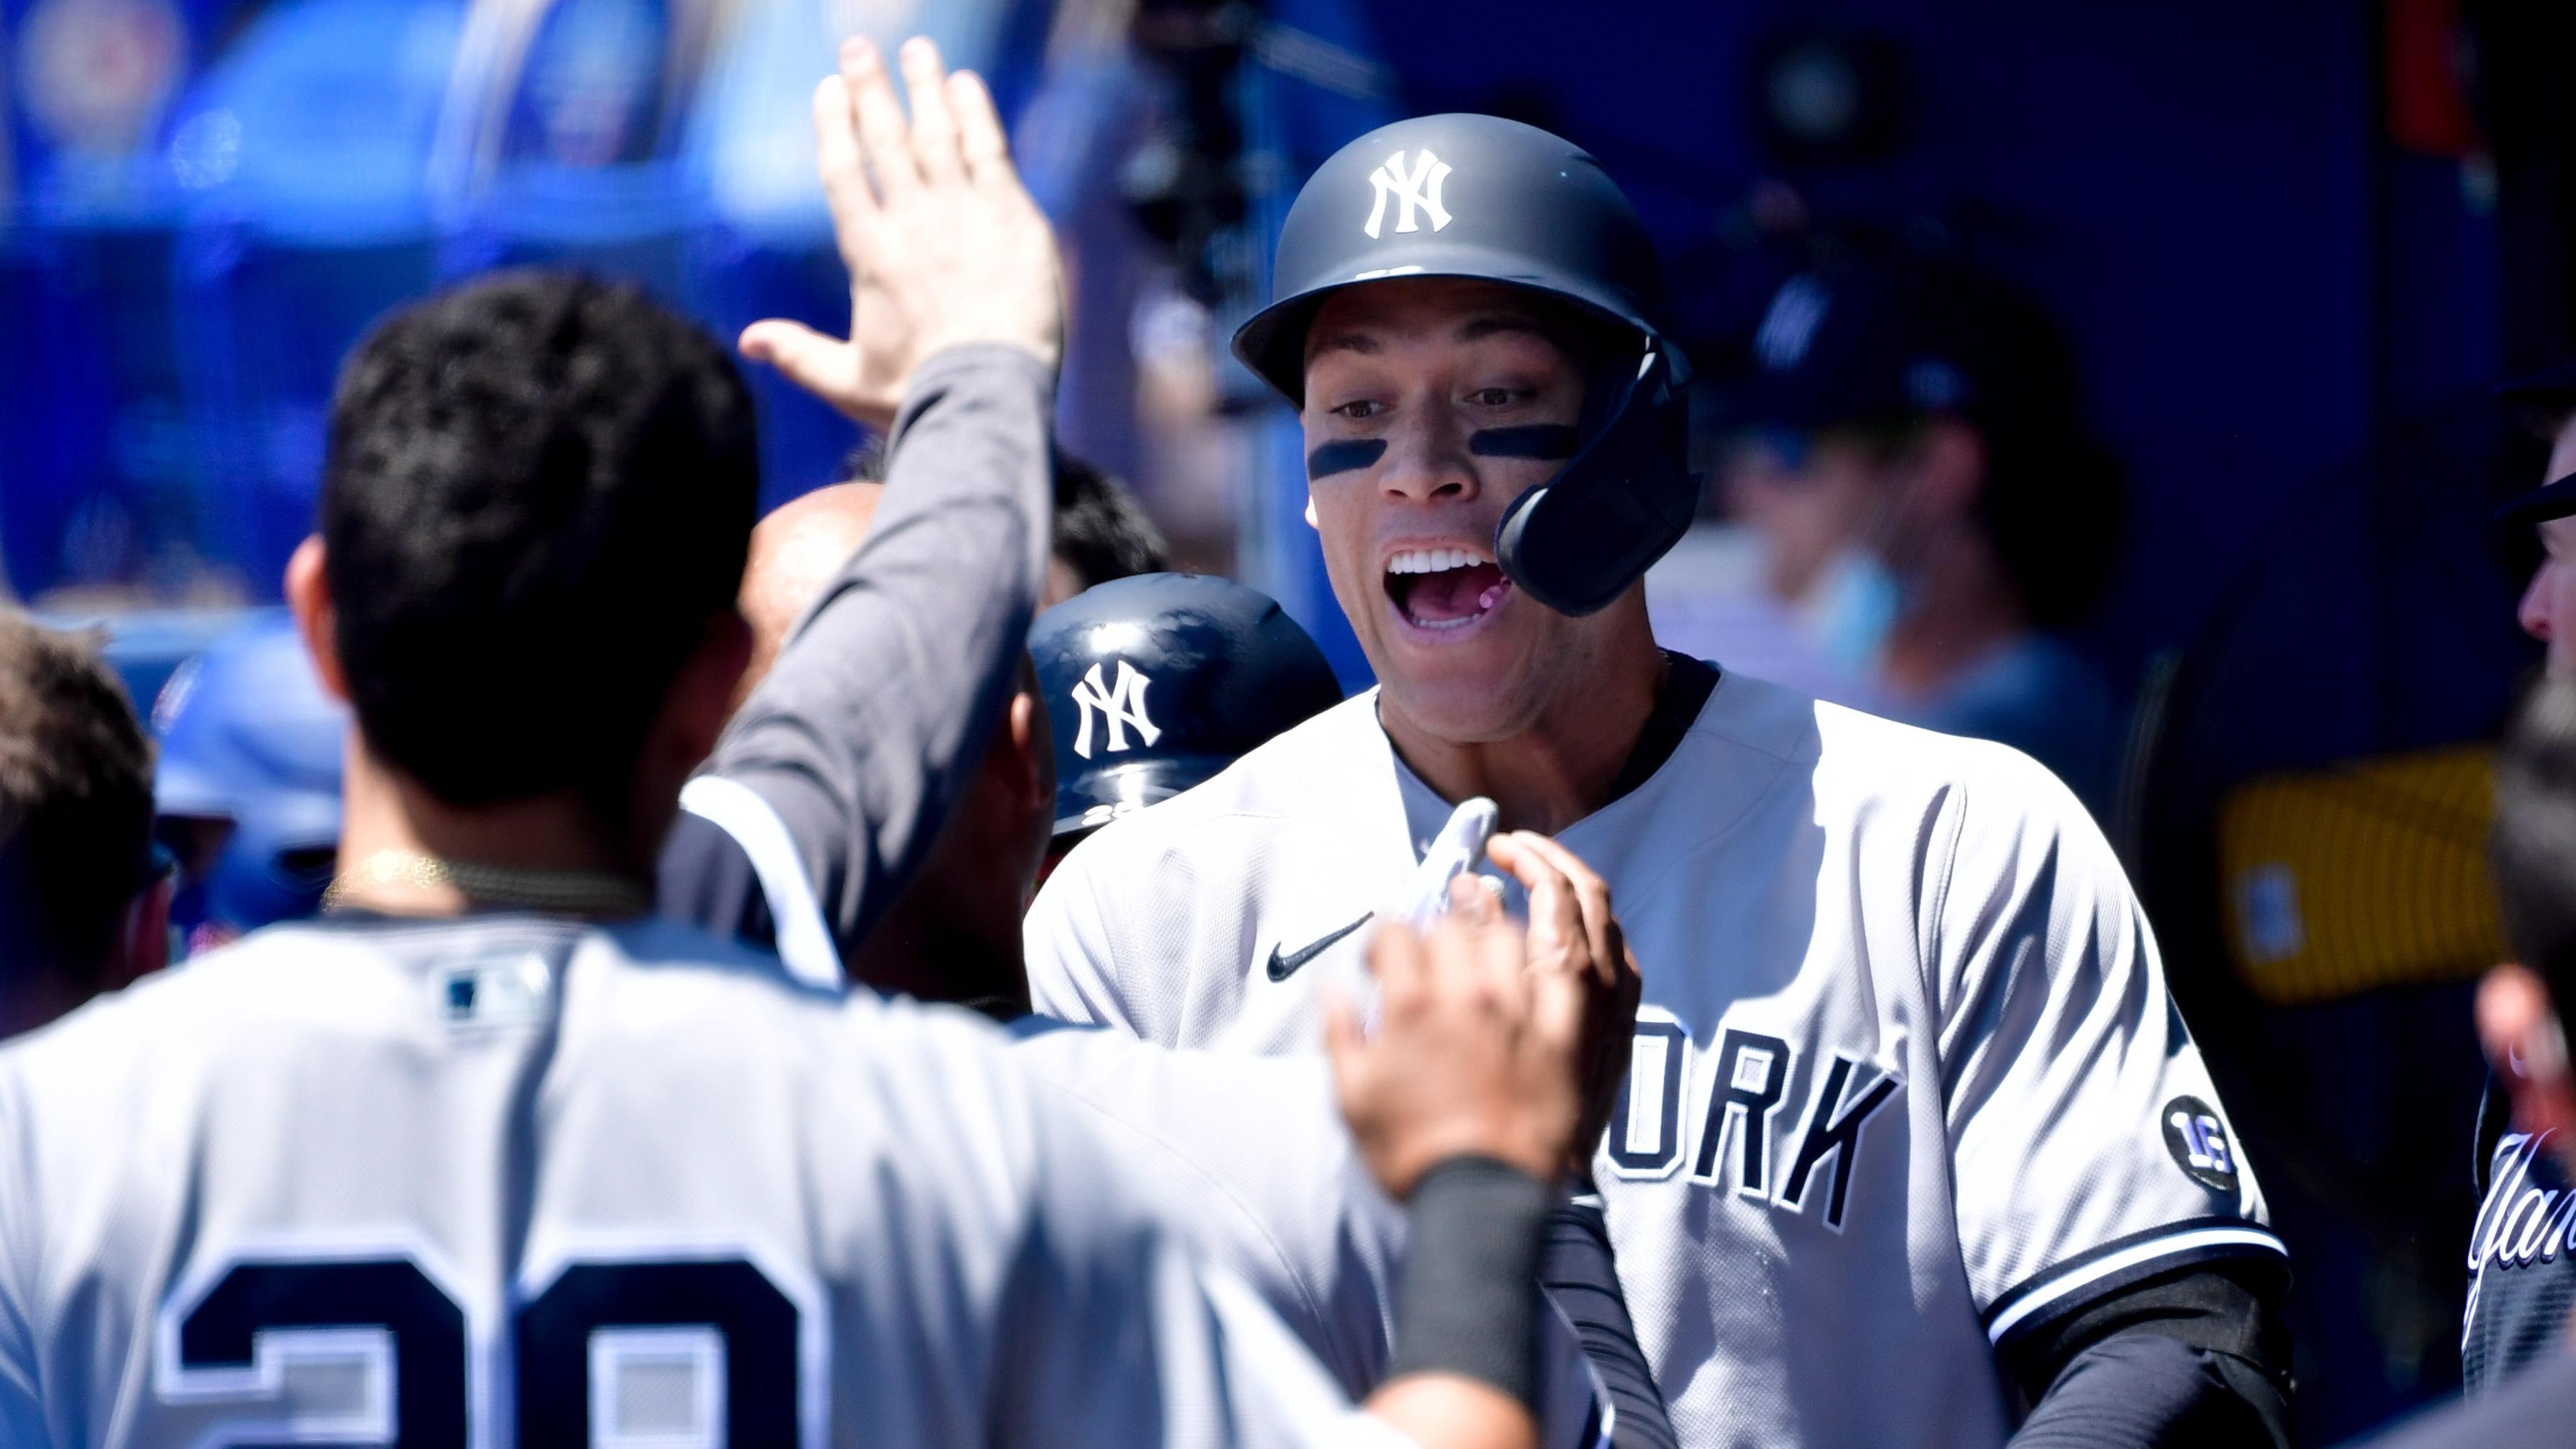 New York Yankees right fielder Aaron Judge (99) celebrates with teammates in the dugout after hitting a solo home run during the first inning against the Toronto Blue Jays at TD Ballpark. / Douglas DeFelice-USA TODAY Sports